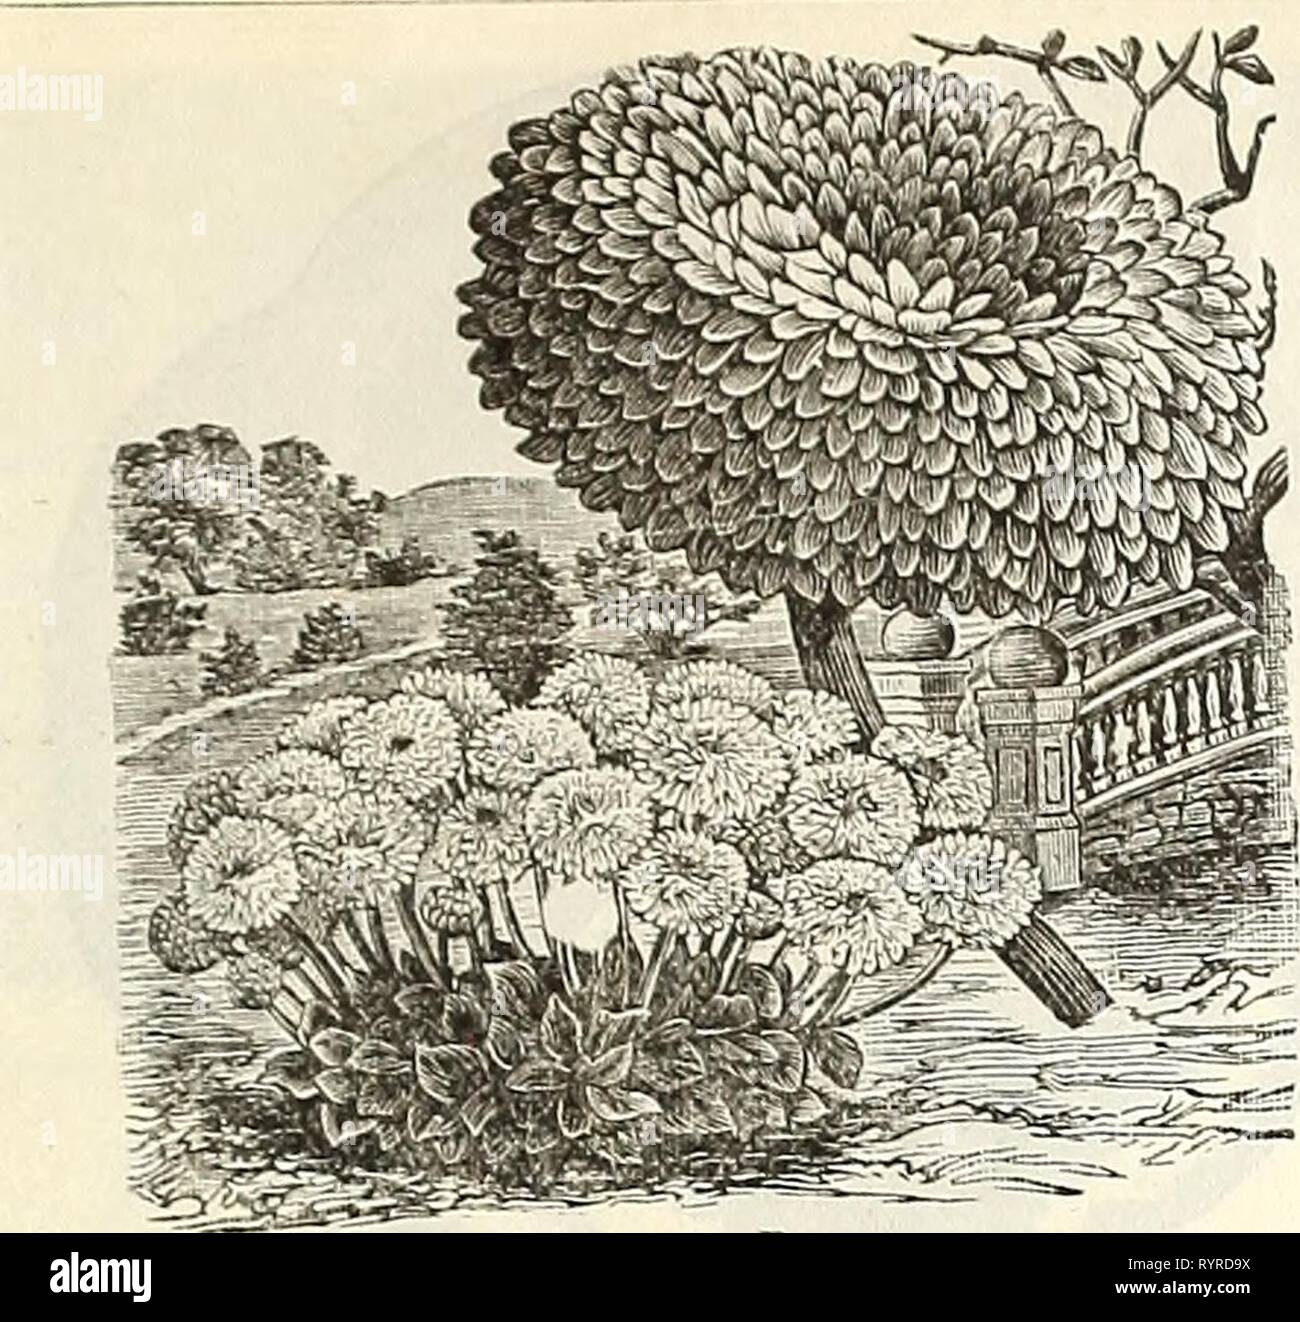 Dreer's quarterly wholesale price list Dreer's quarterly wholesale price list of seeds, plants &c. : spring edition April 1895 June . dreersquarterlyw1895henr 0 Year: 1895  DREER'S WHOLESALE PRICE LIST. 15    Snowball Daisy. Trade Daisy, ' Longfello'w ' ' Snowball, new white ' Extra Double White '' Extra Double Mixed '' New Quilled, mixed Delphinium formosum, deep blue... Dahlia. Large flowering, double mixed ' Single choicest colors mixed ' Tom Thumb, mixed ' Single, Jules Chretien, bright scarlet, half dwarf; fine Dracaena Indivisa ' ' Lineata ' ' Australis Bschscholtzia. (California Poppy). Stock Photo